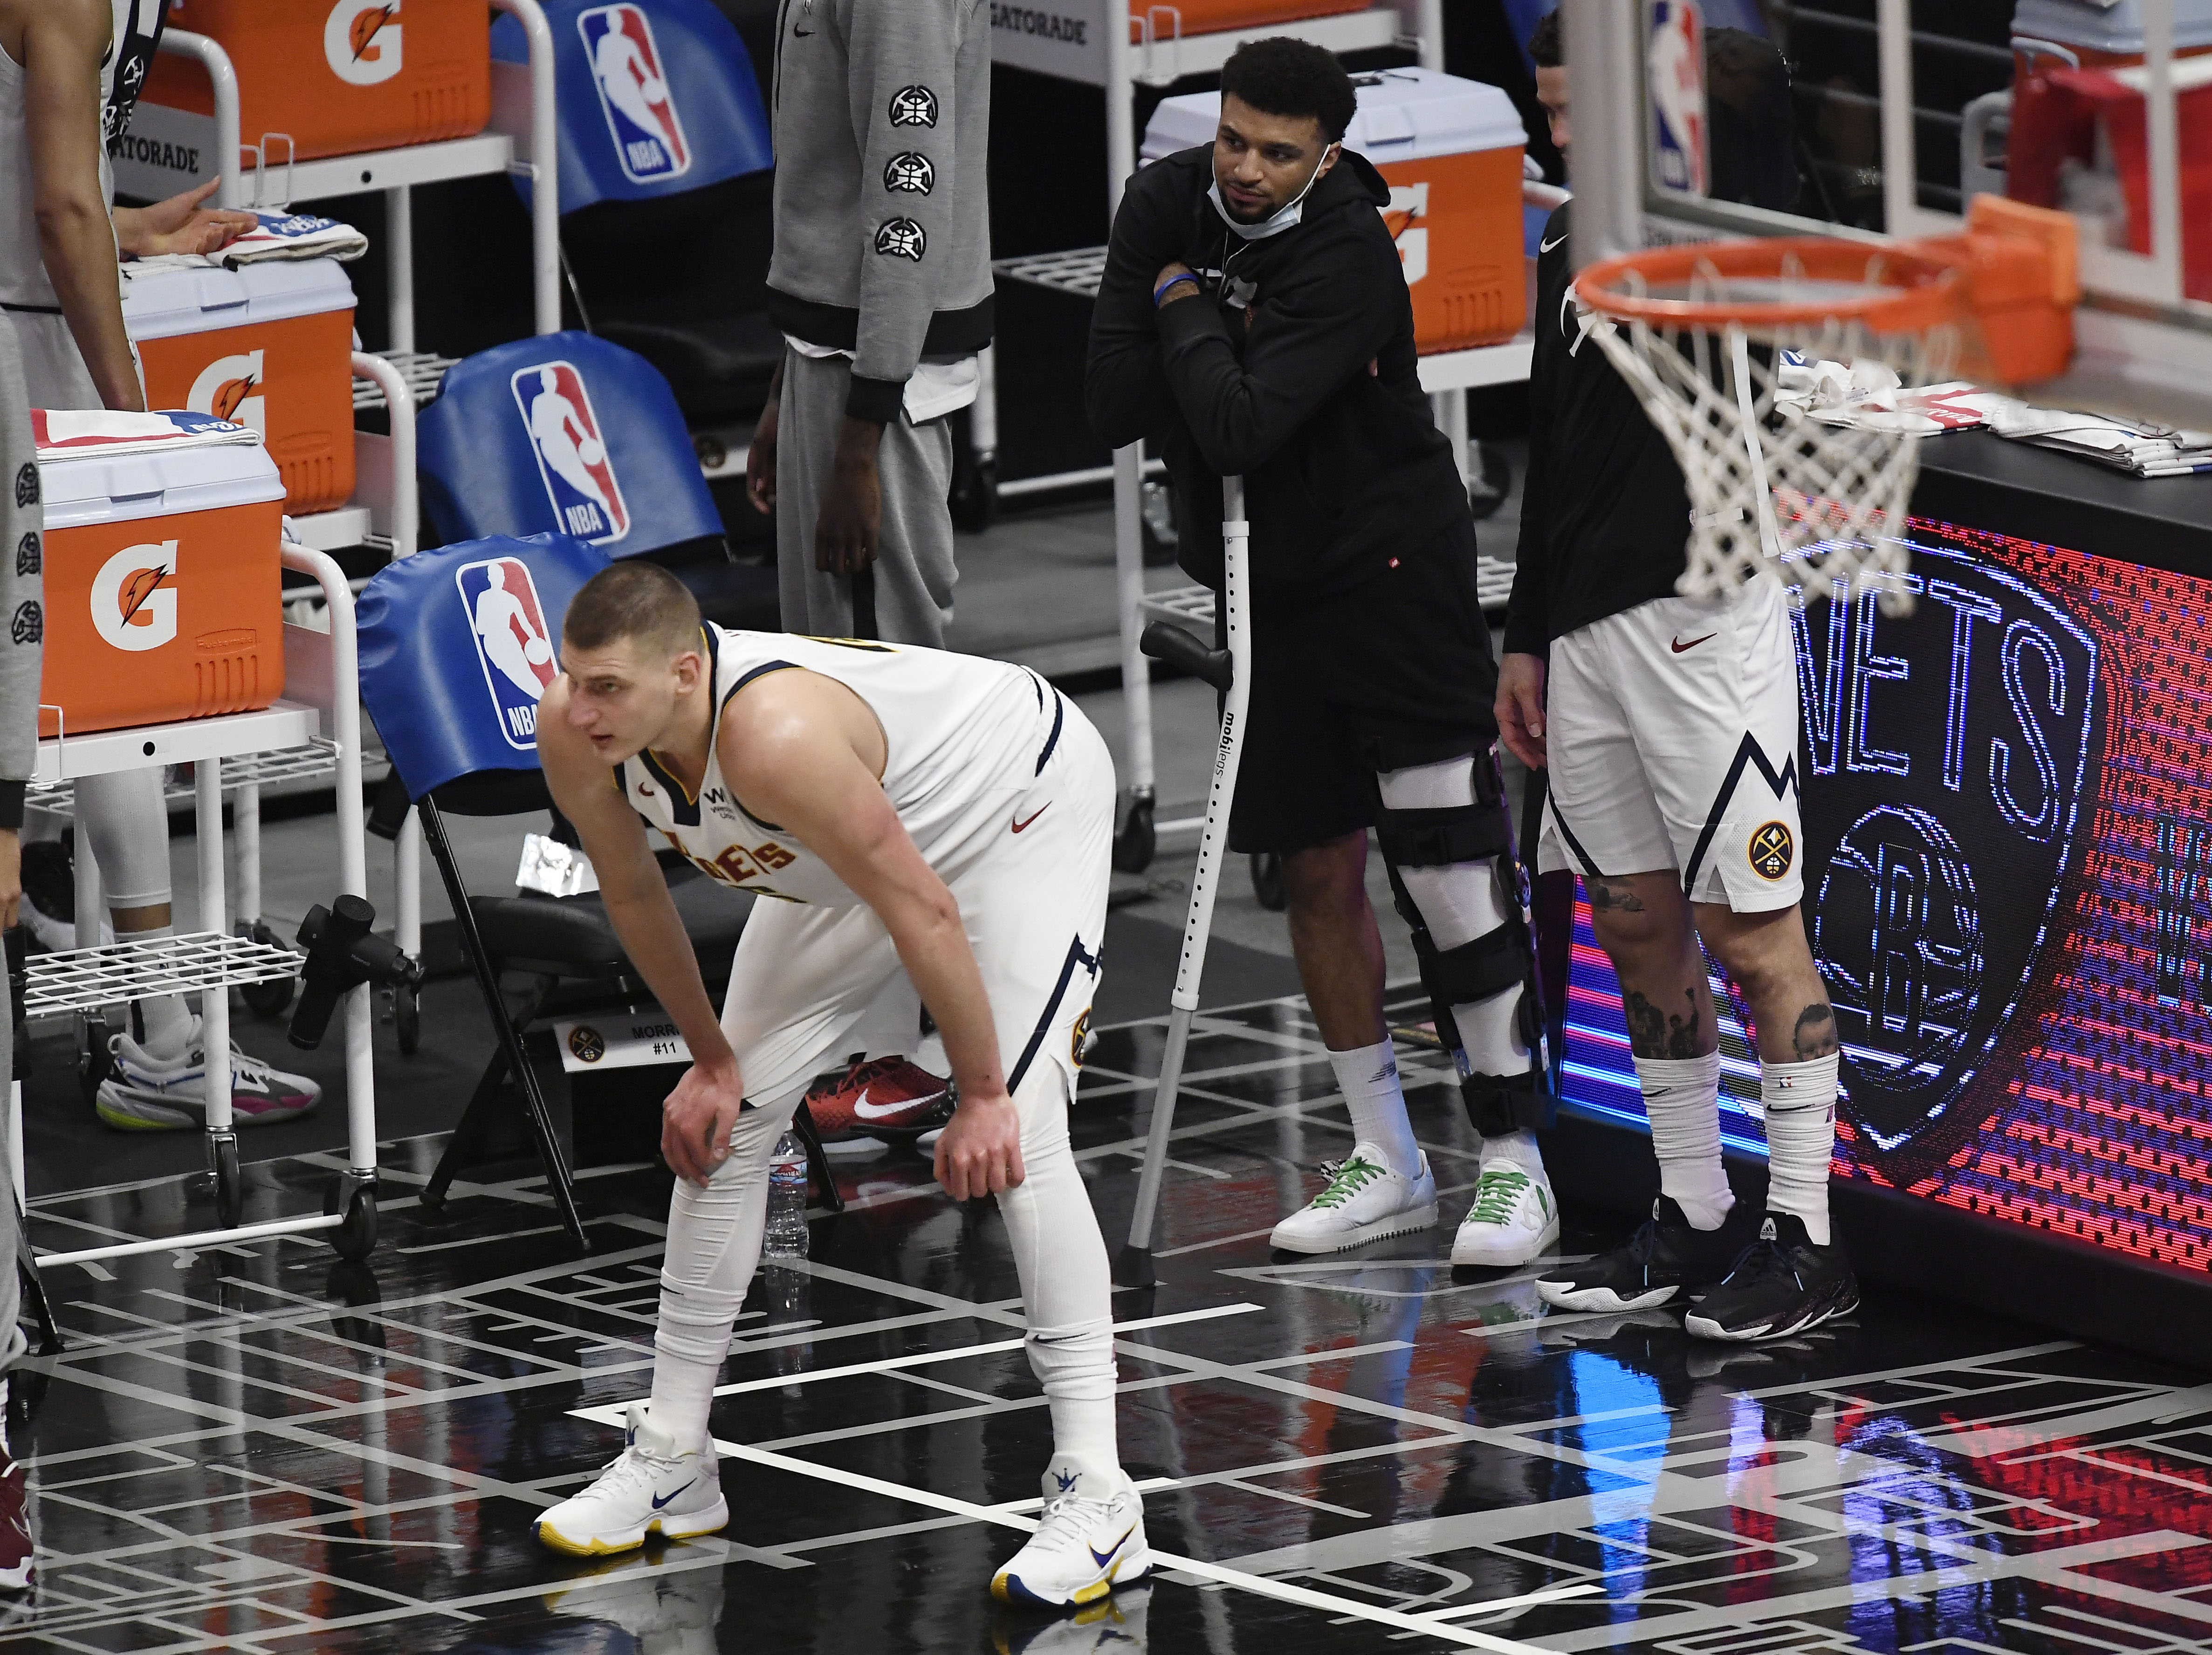 Denver Nuggets stars Nikola Jokic and Jamal Murray look on during an NBA game against the LA Clippers in May 2021